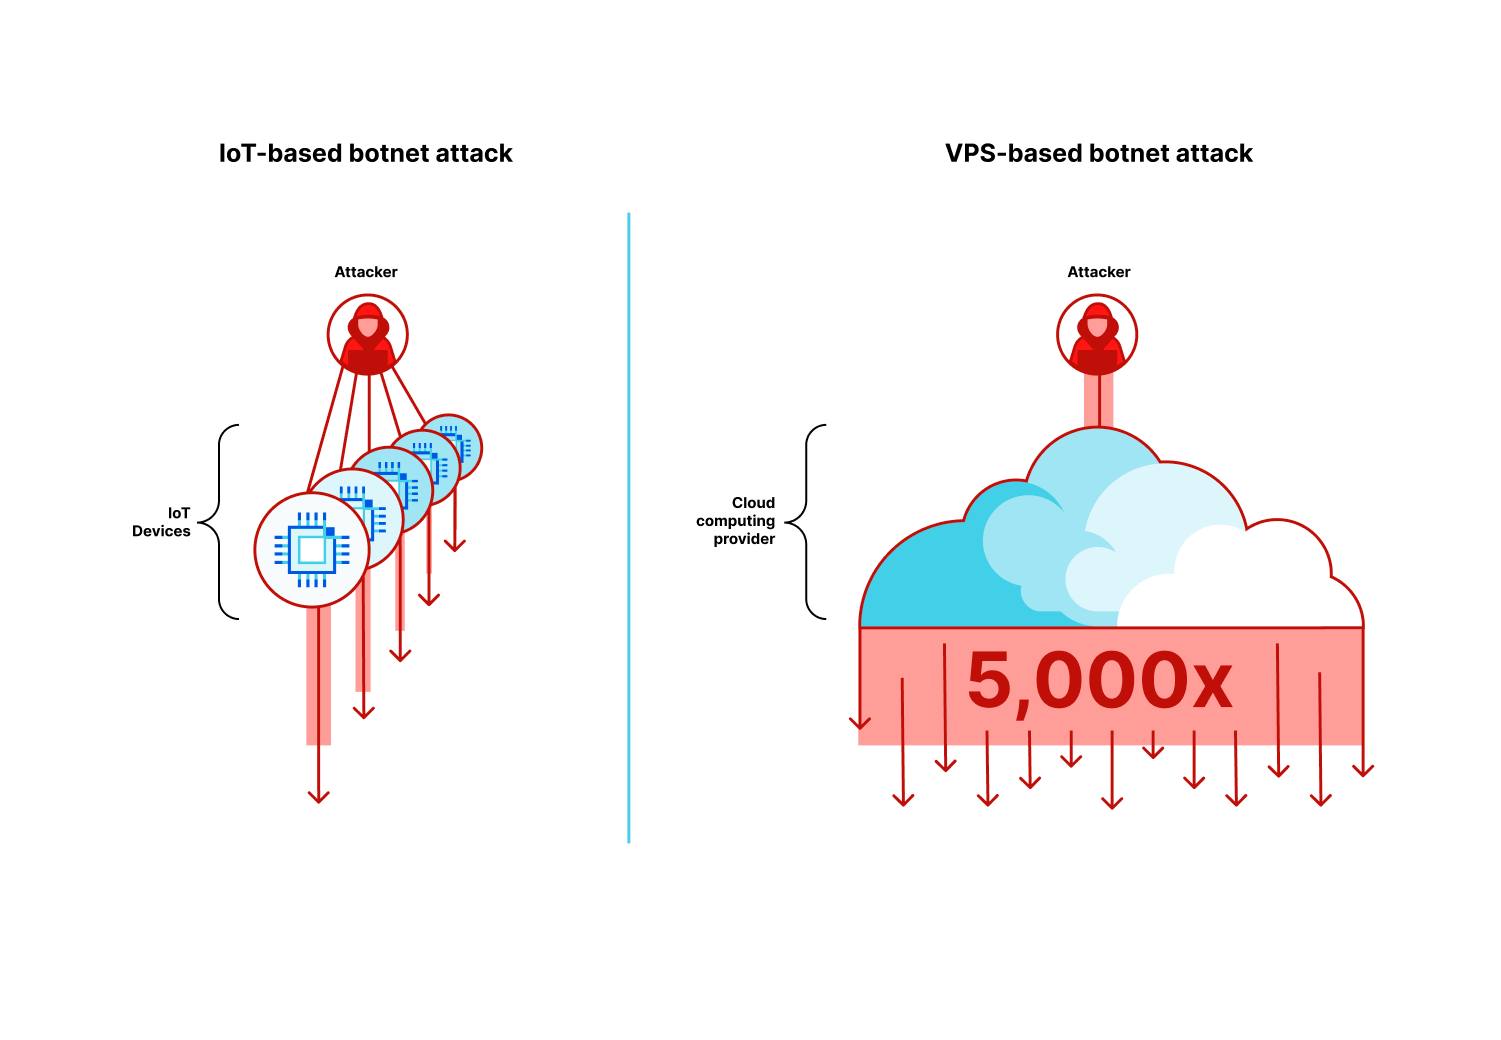 Illustration of an IoT botnet compared with a VM botnet.